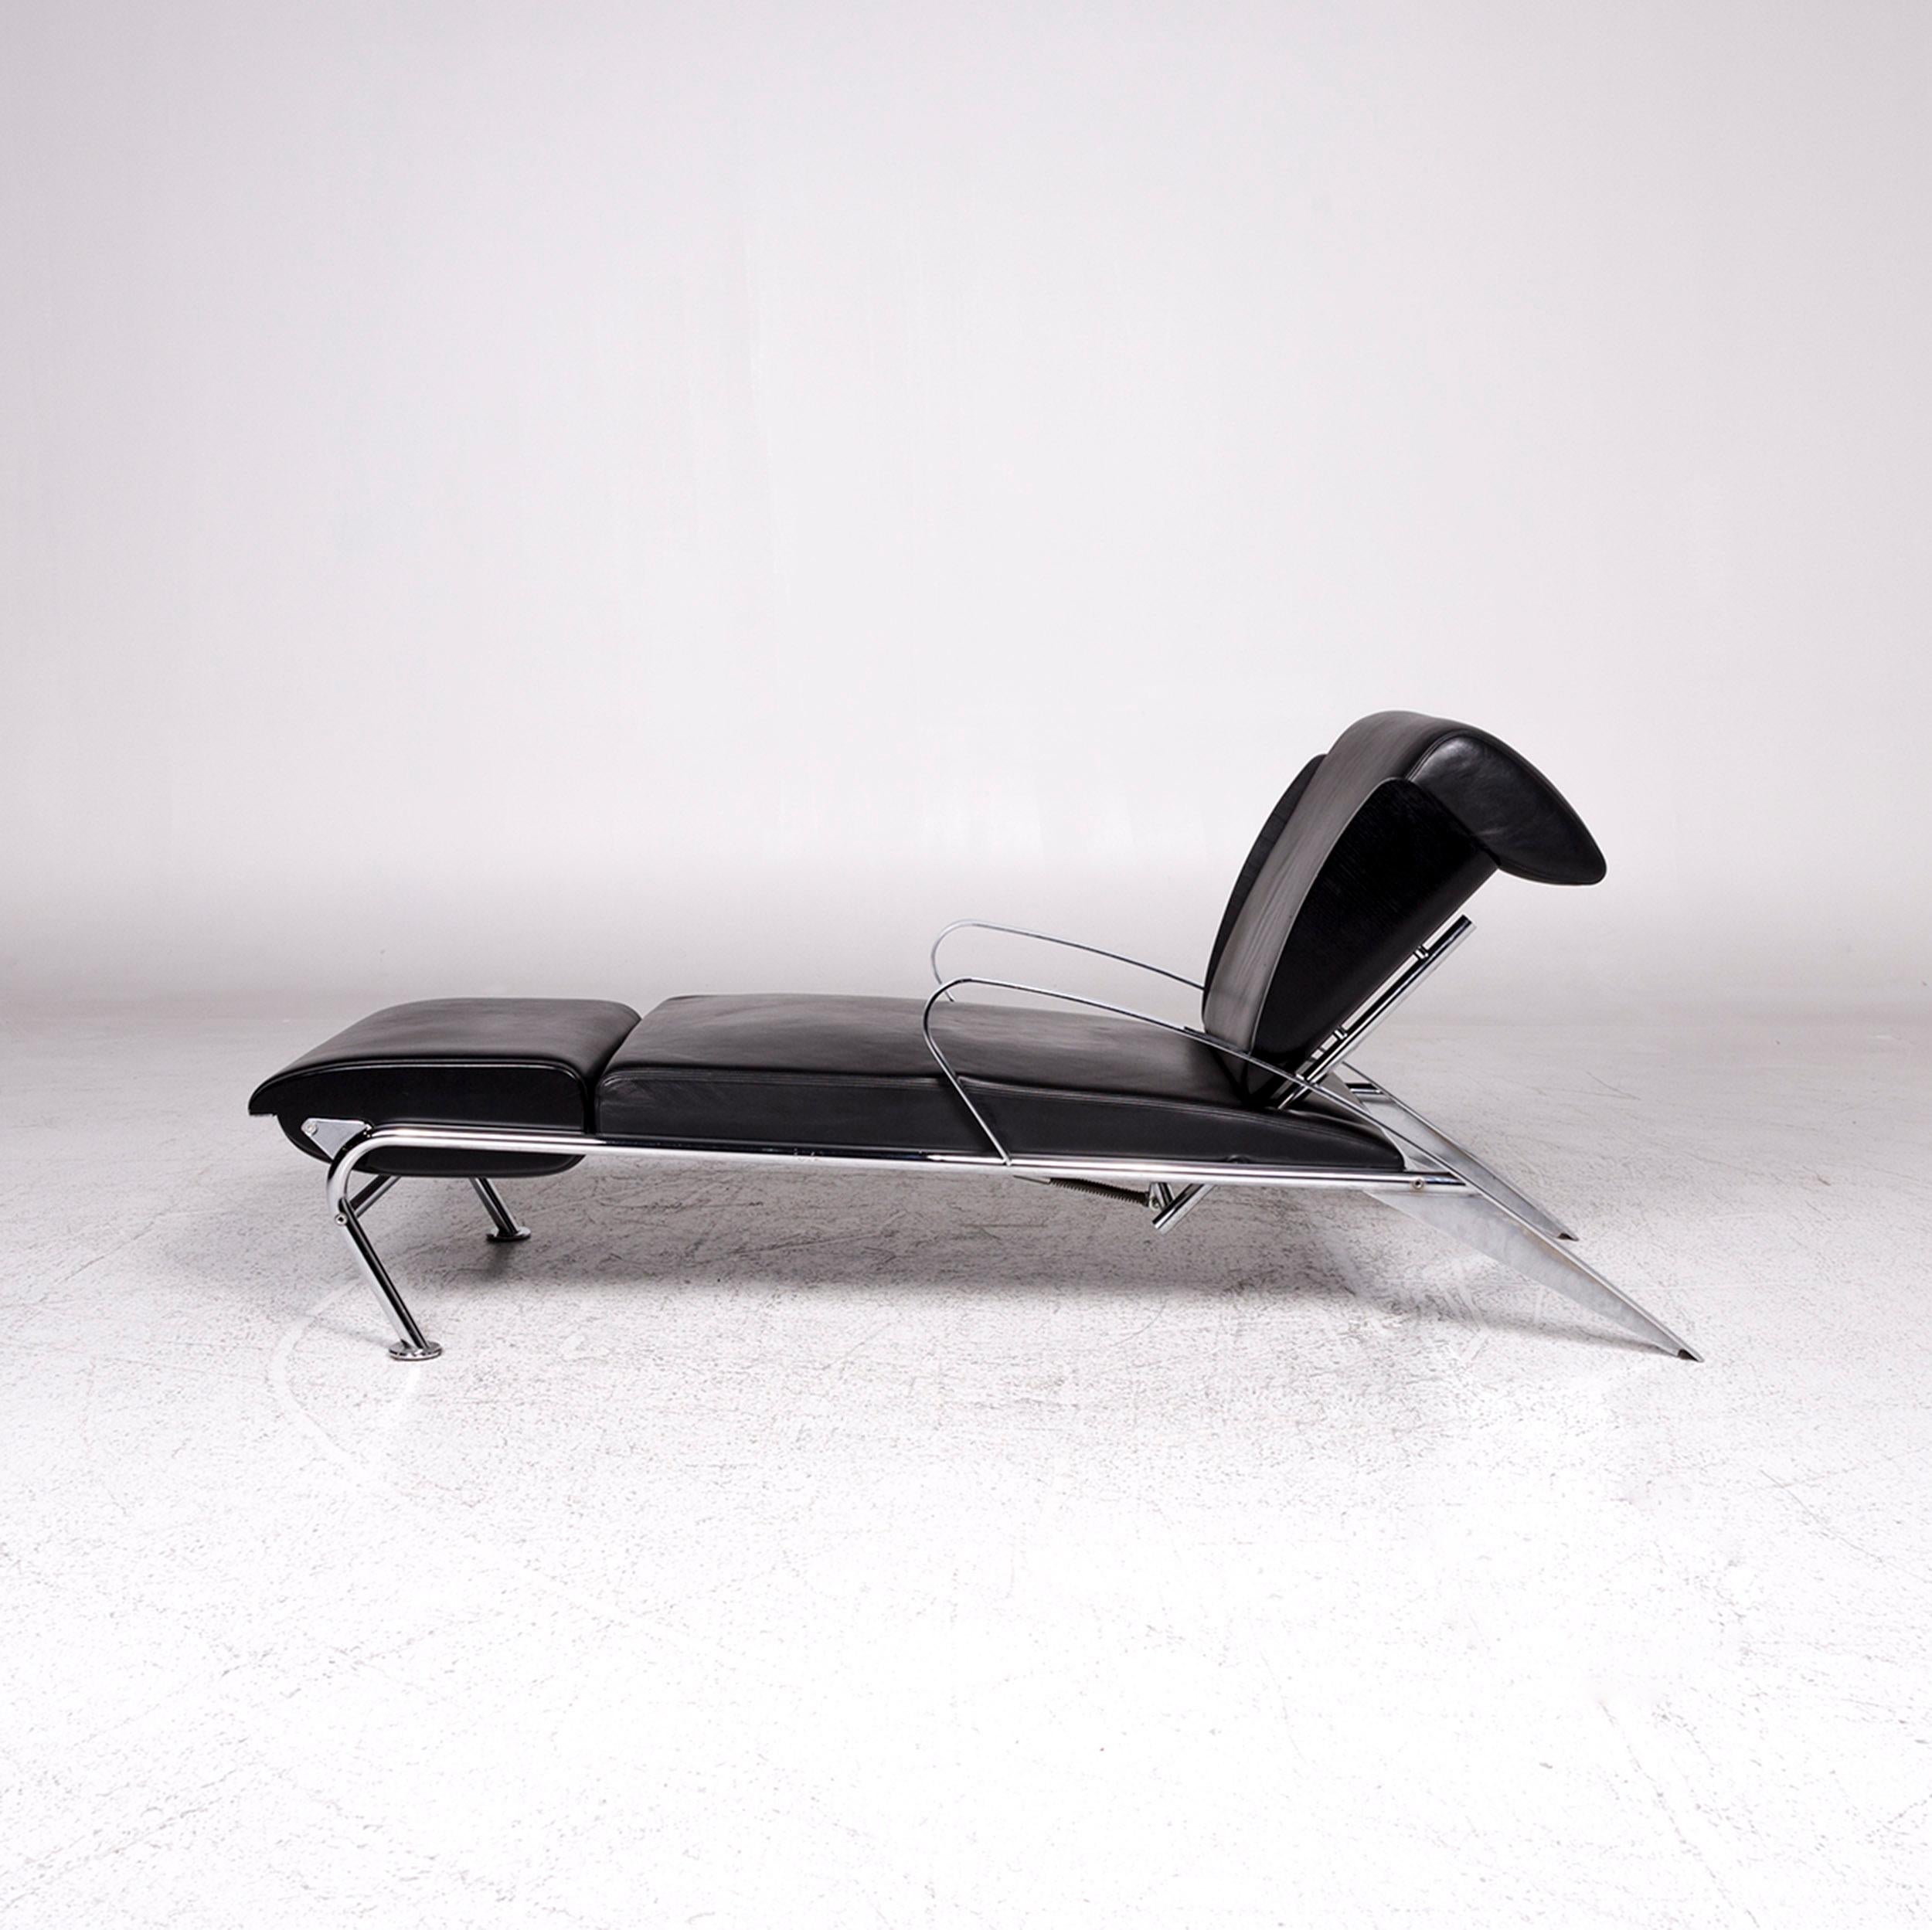 Moroso Massimo Leather Lounger Black Relax function For Sale 6